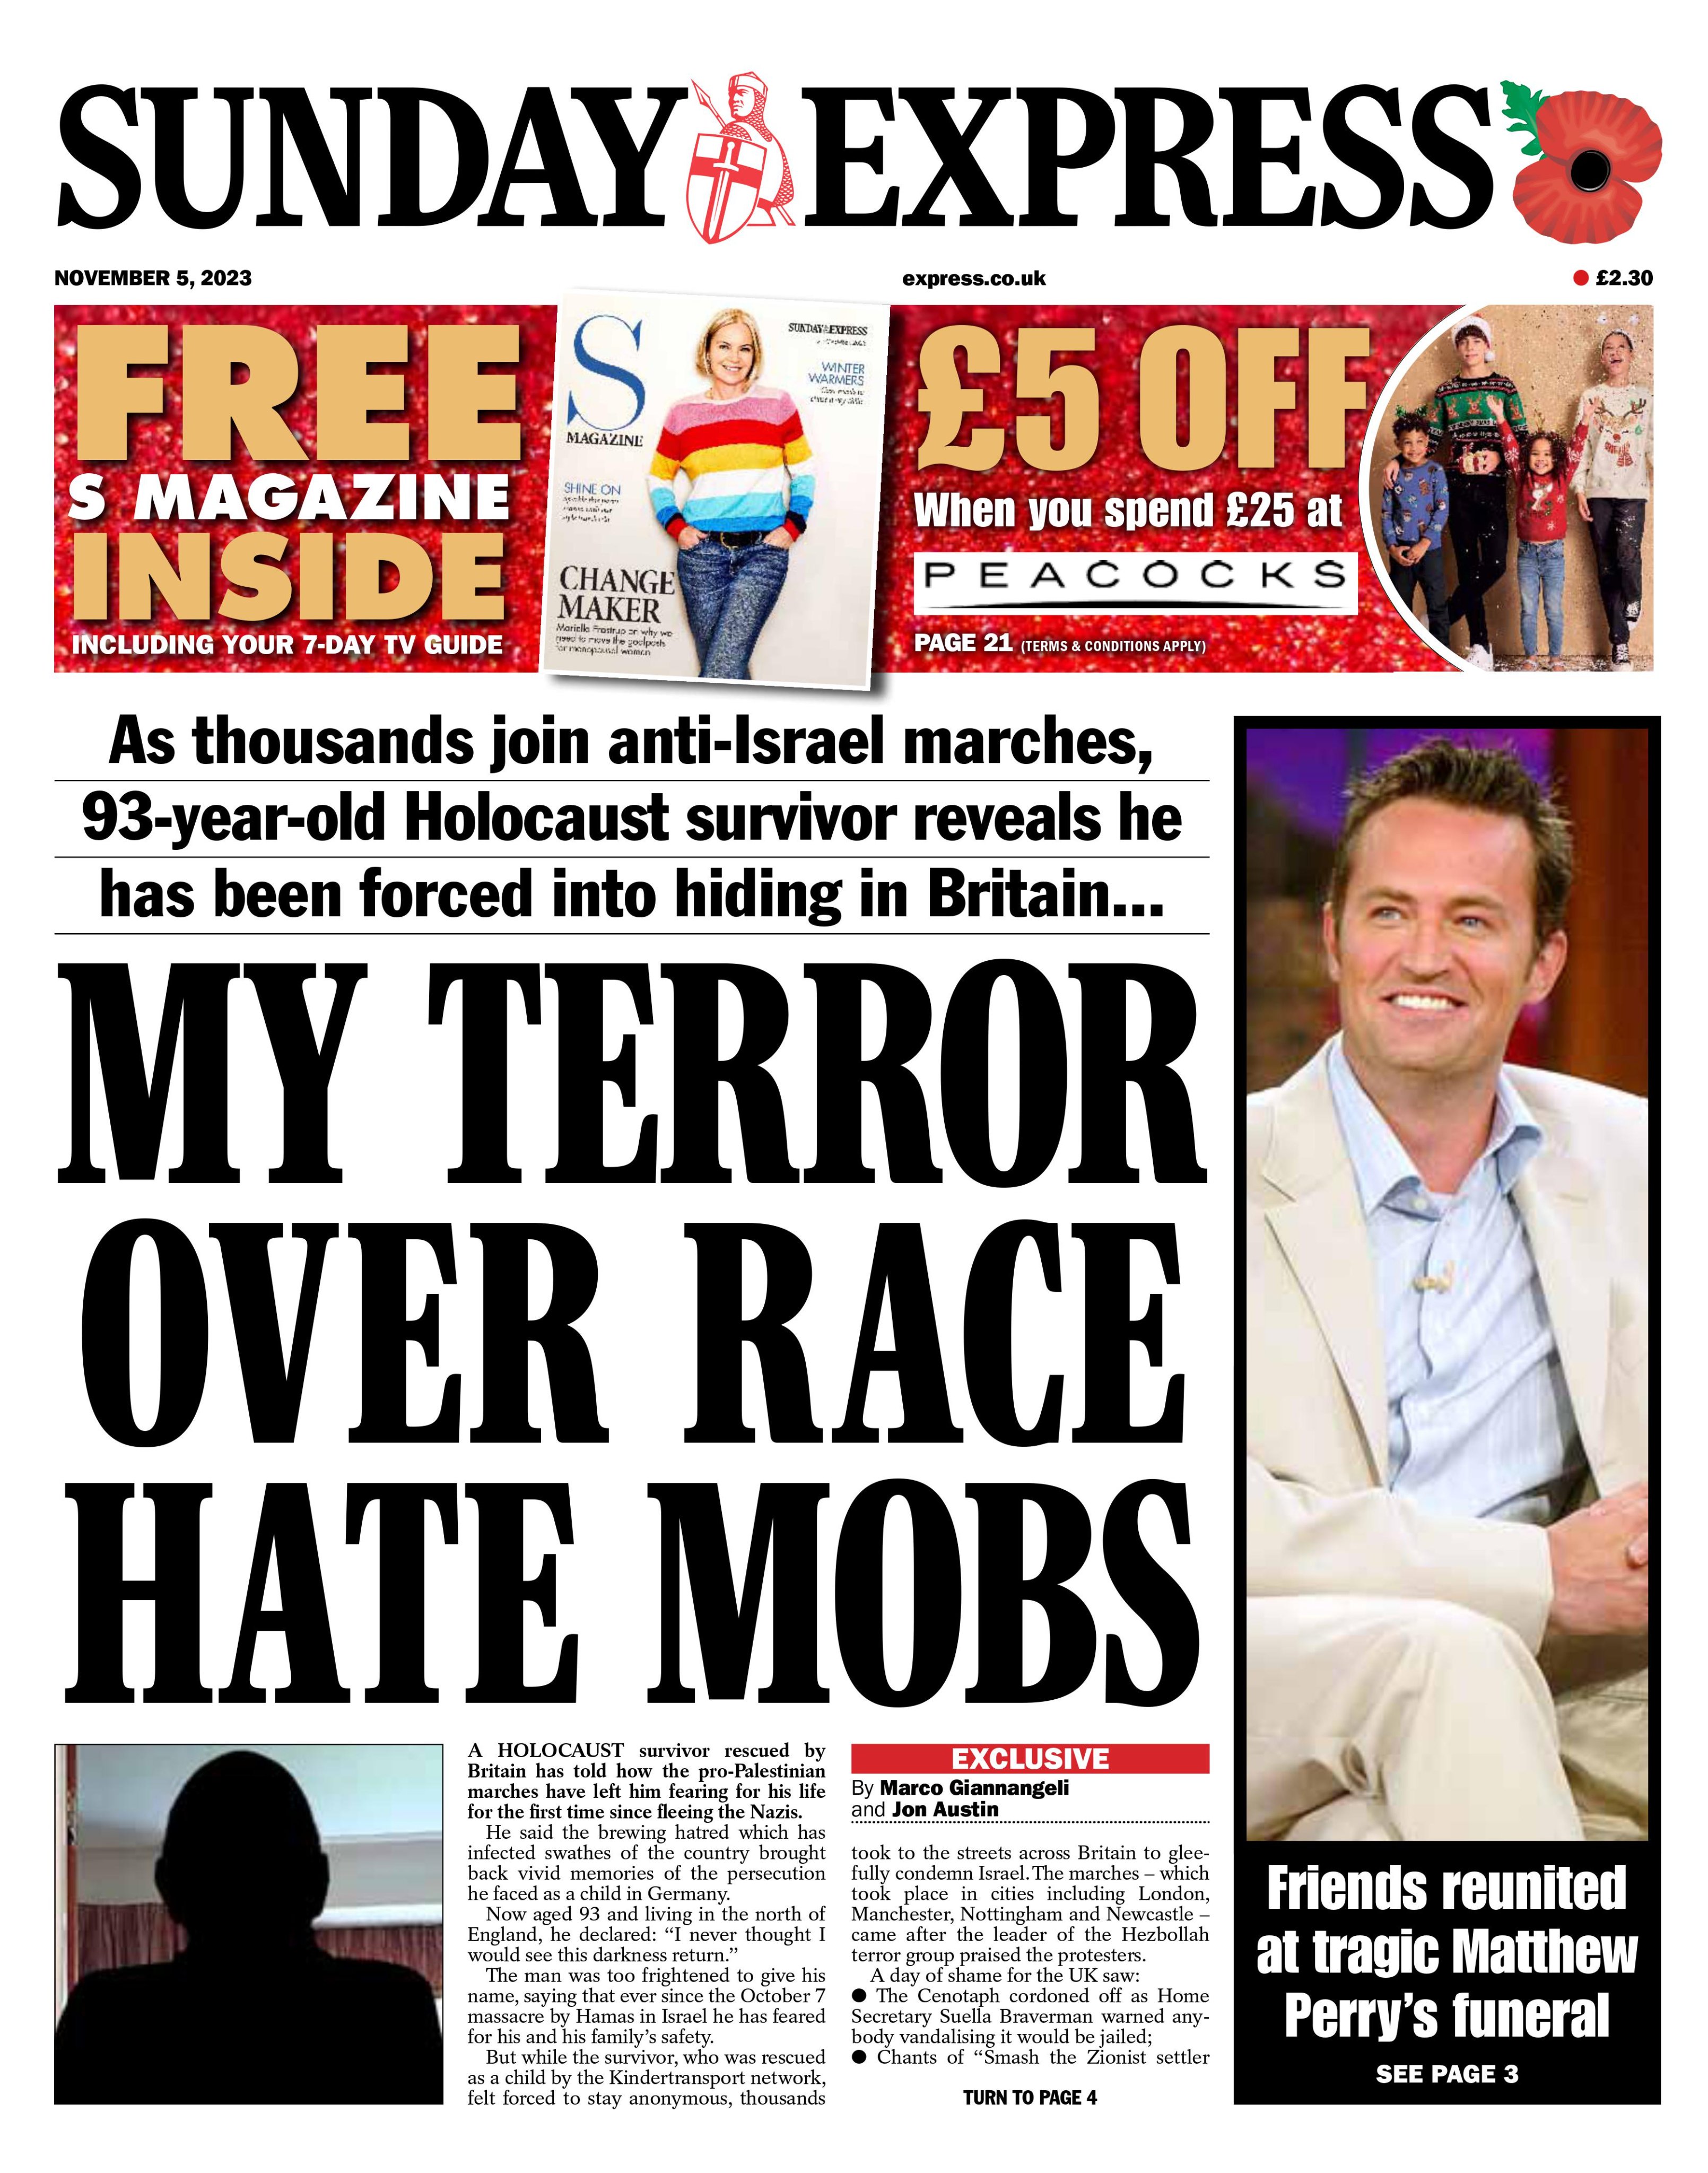 Front page: My terror over race hate mobs #tomorrowspapertoday